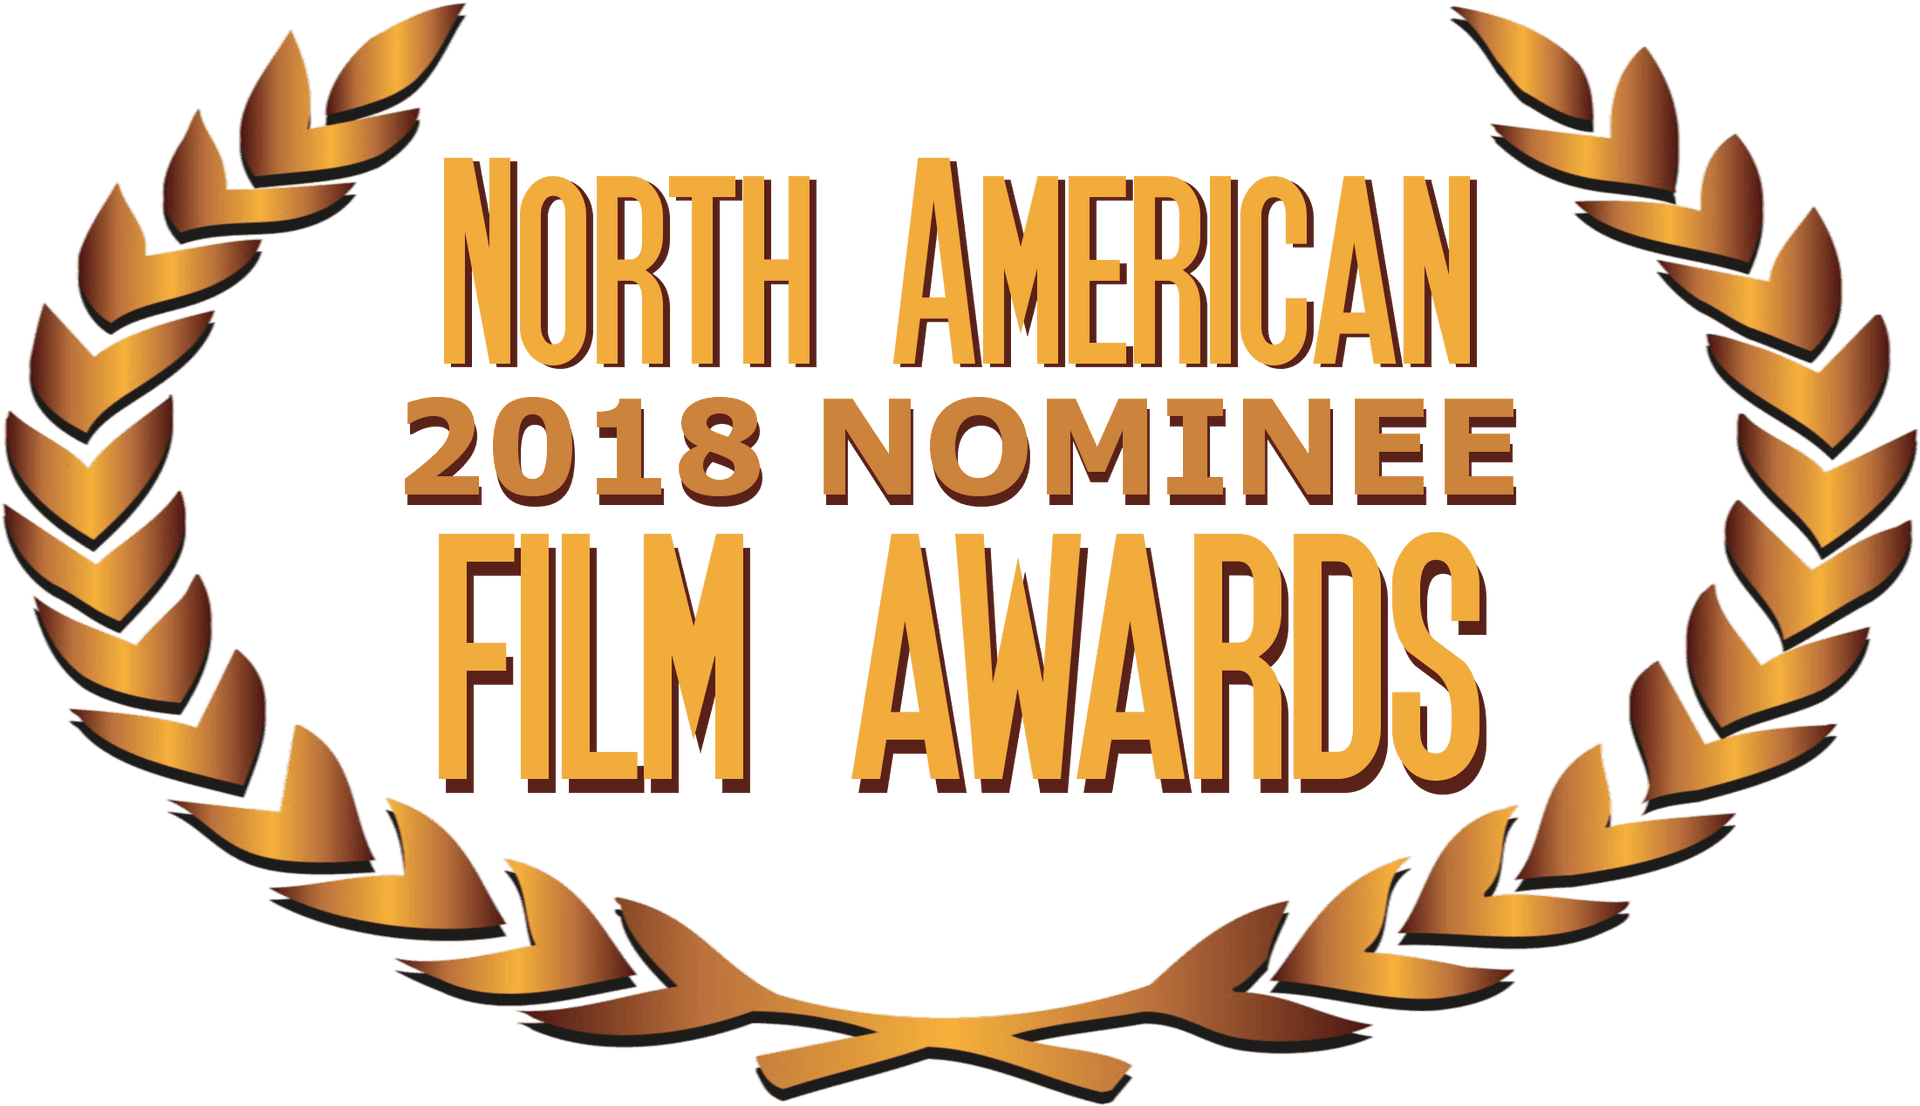 North American Film Awards Nominee2018 PNG image